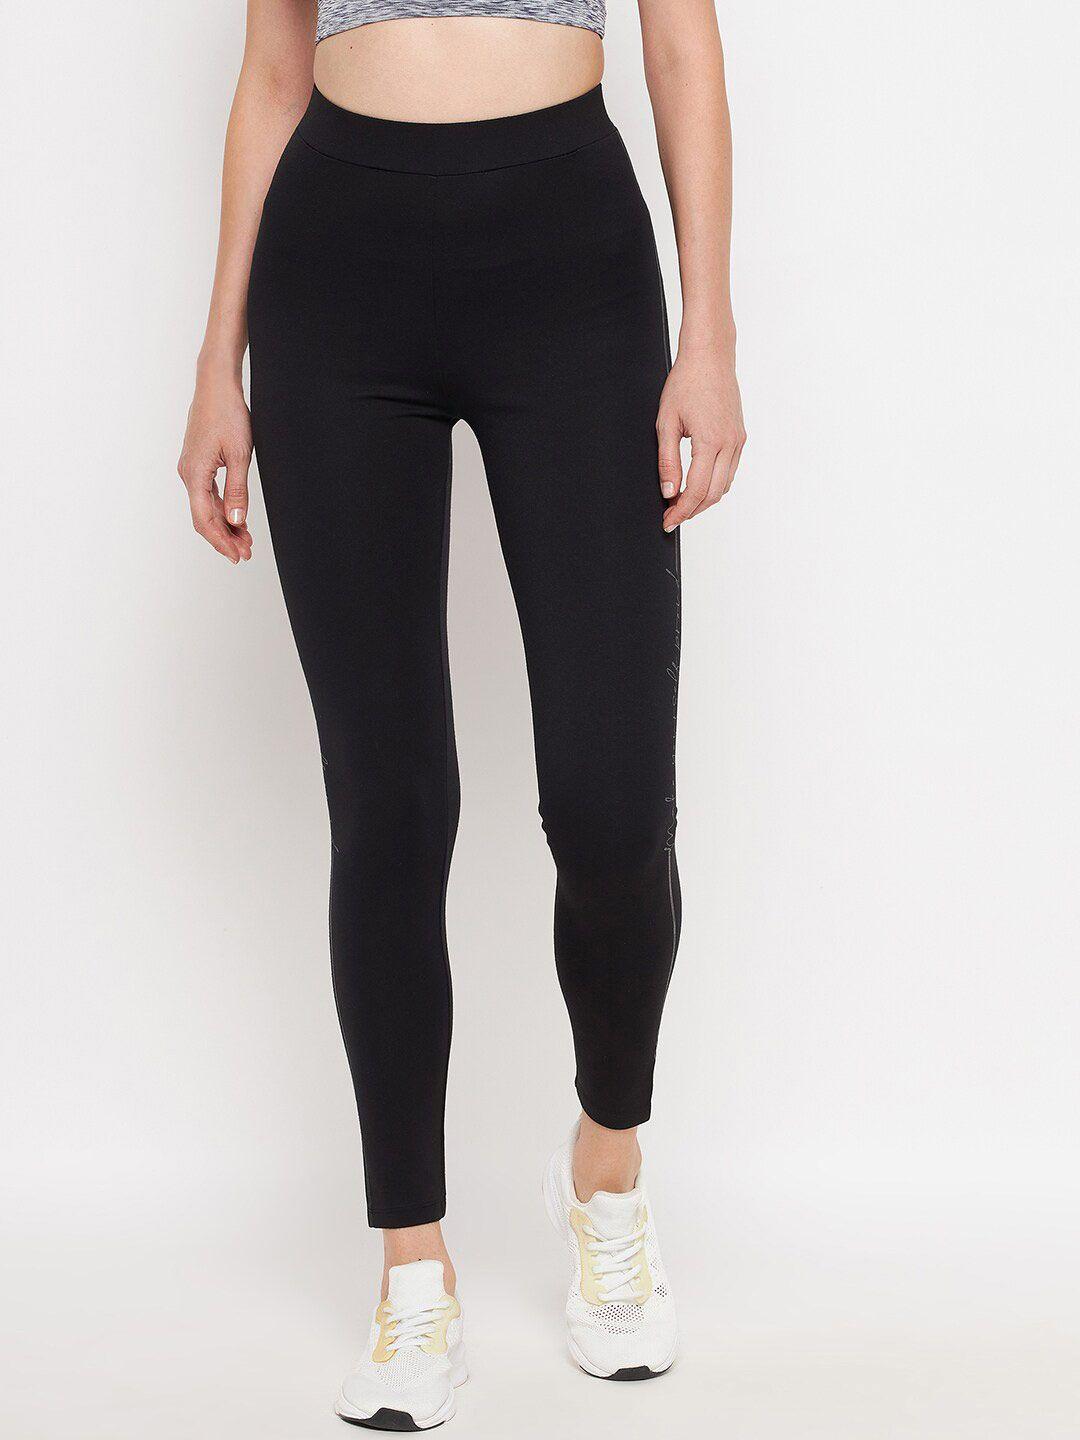 Madame Woman Black Solid Cotton Jeggings